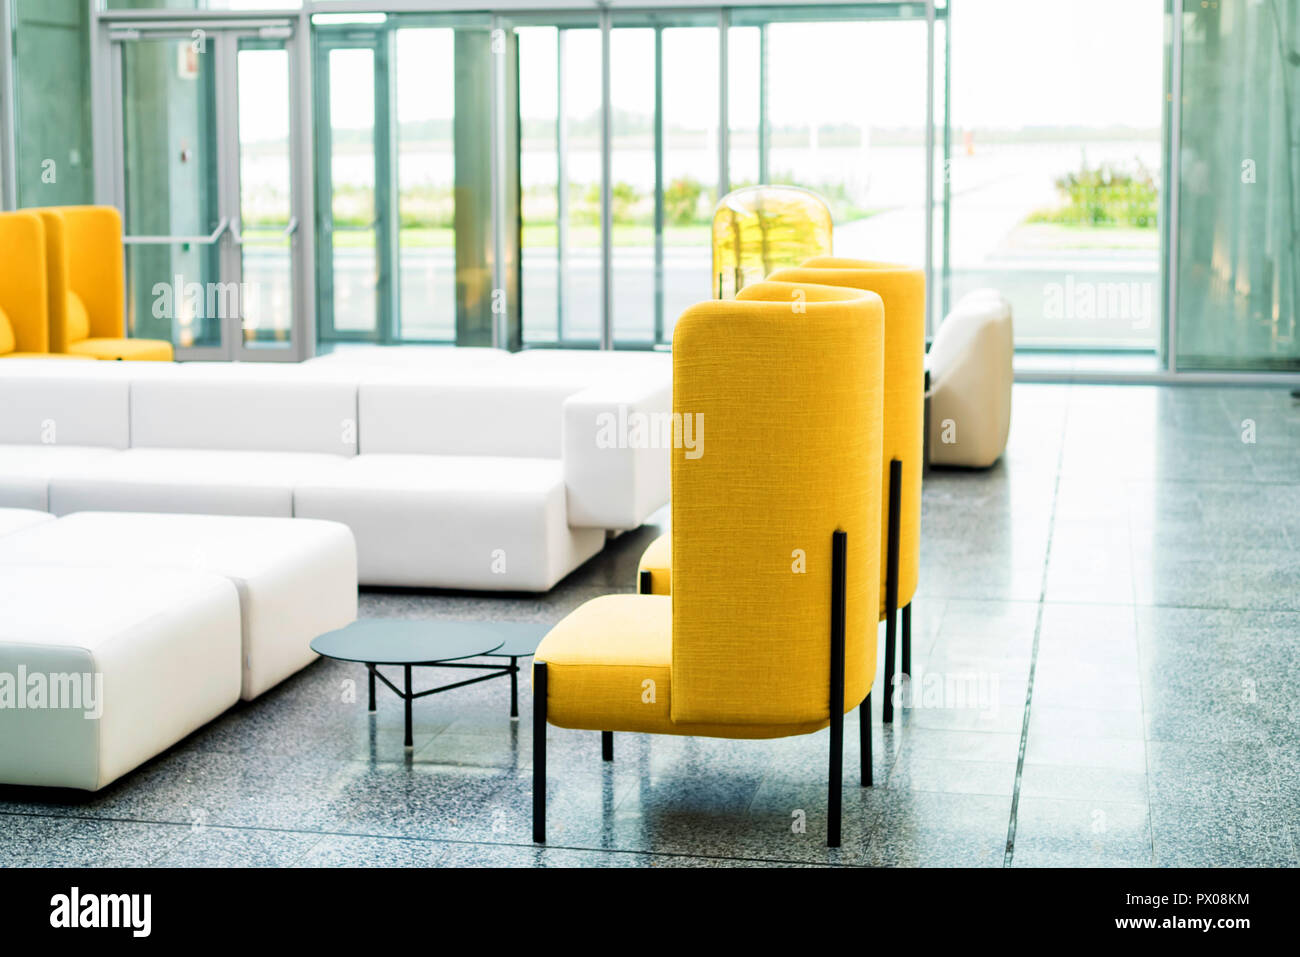 Office waiting area interior with white sofas and yellow chairs Stock Photo